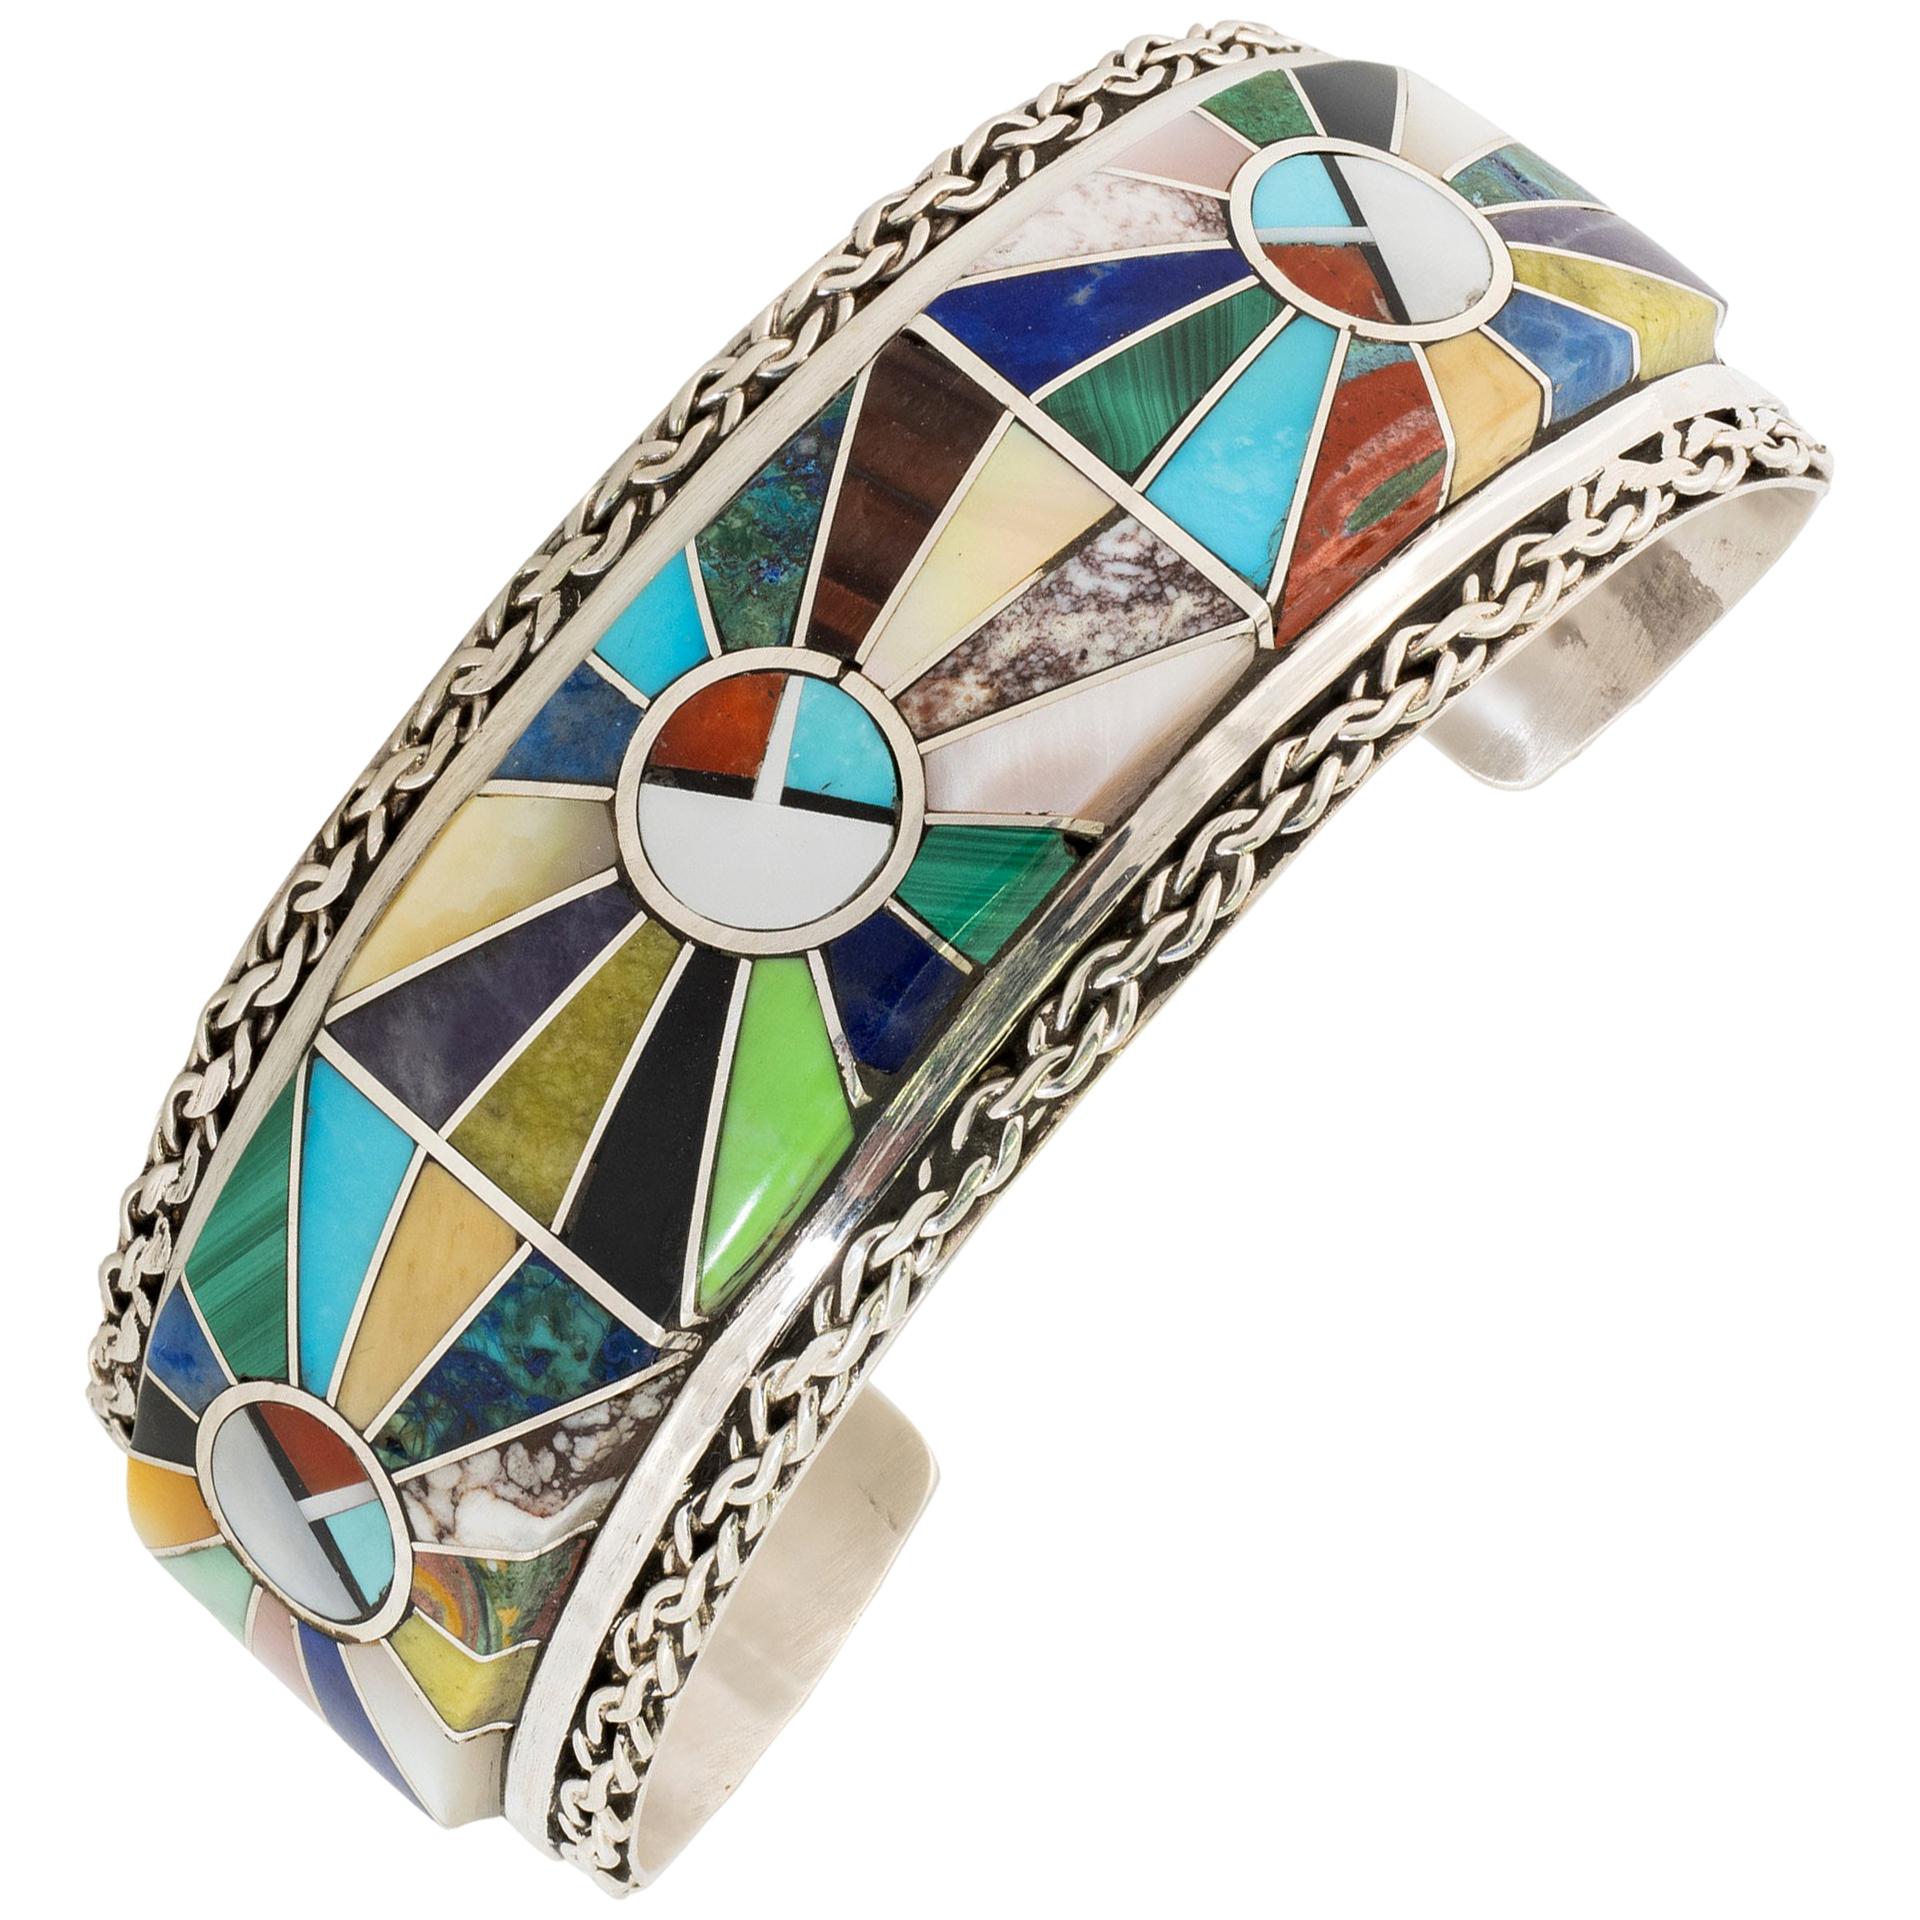 Zuni Inlaid Stones and Sterling Silver Bracelet